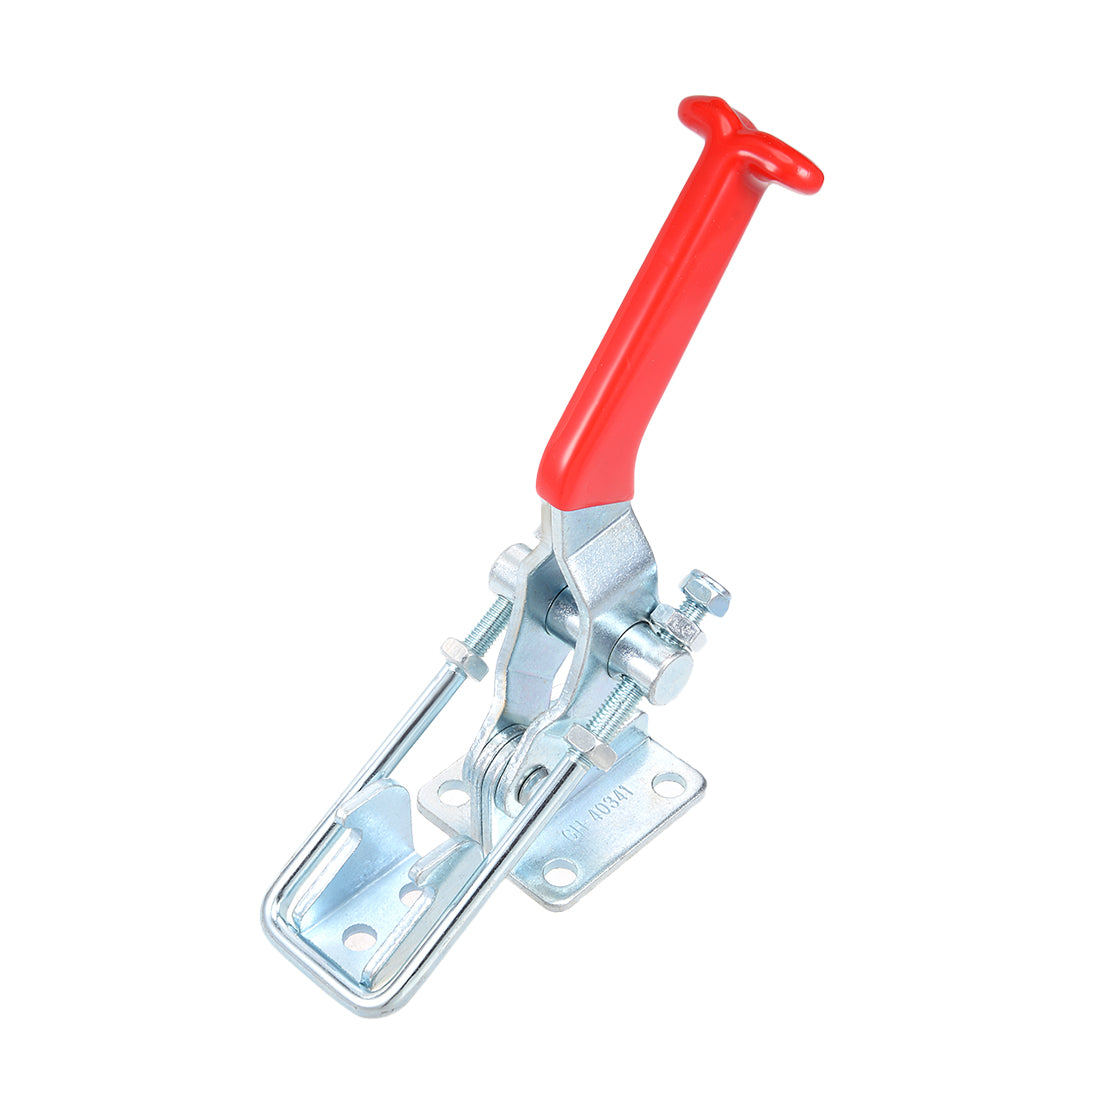 uxcell Uxcell Toggle Latch Clamp 900Kg 1980lbs Capacity Pull Action Adjustable Latch GH-40341